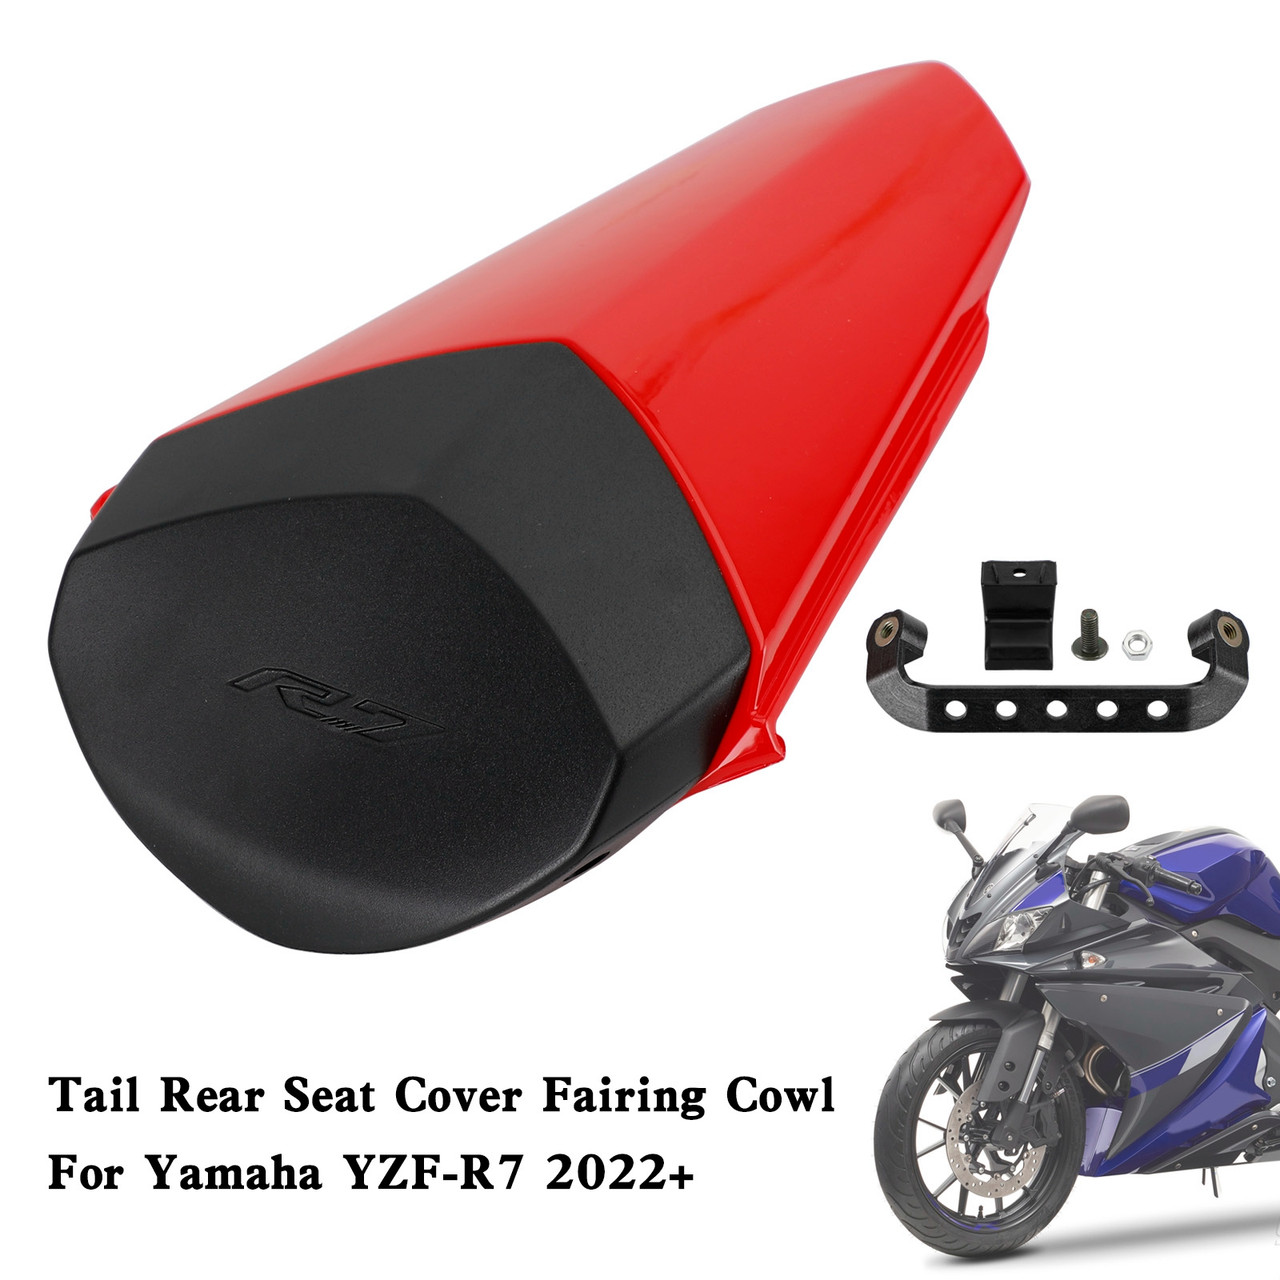 Tail Rear Seat Cover Fairing Cowl For YAMAHA YZF-R7 YZF R7 2022-2023 Red